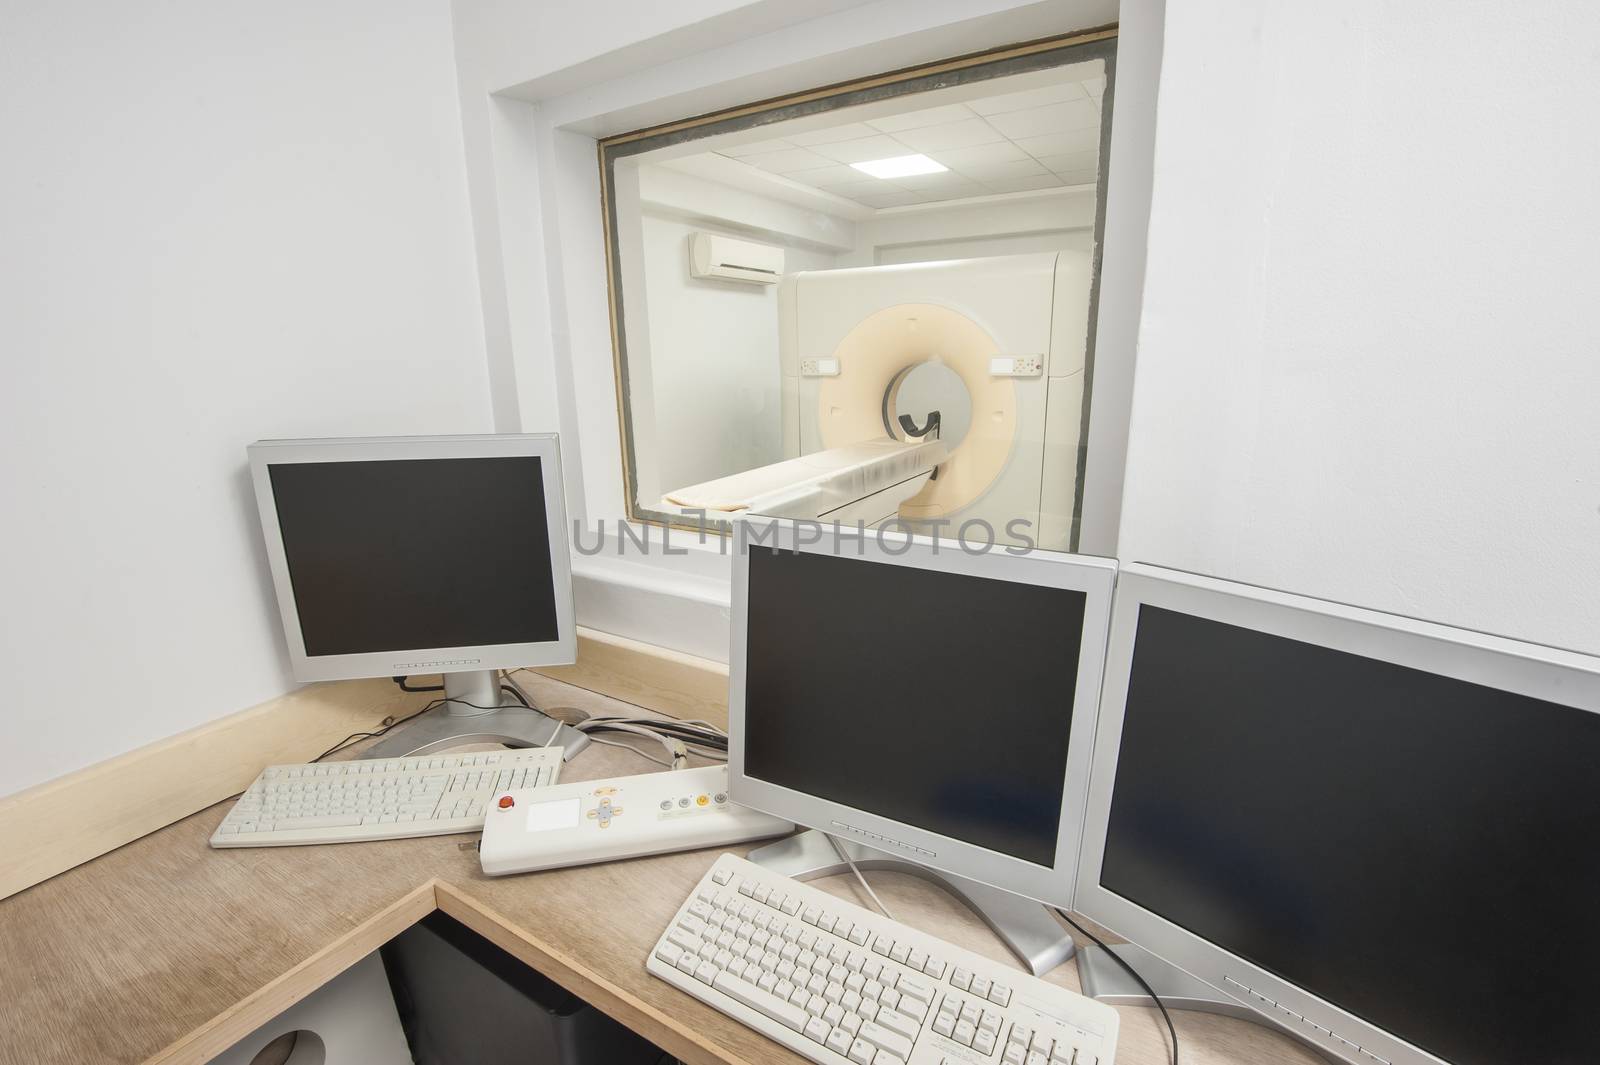 Hi-tech medical equipment CT scanner in hospital medical clinic center with control room